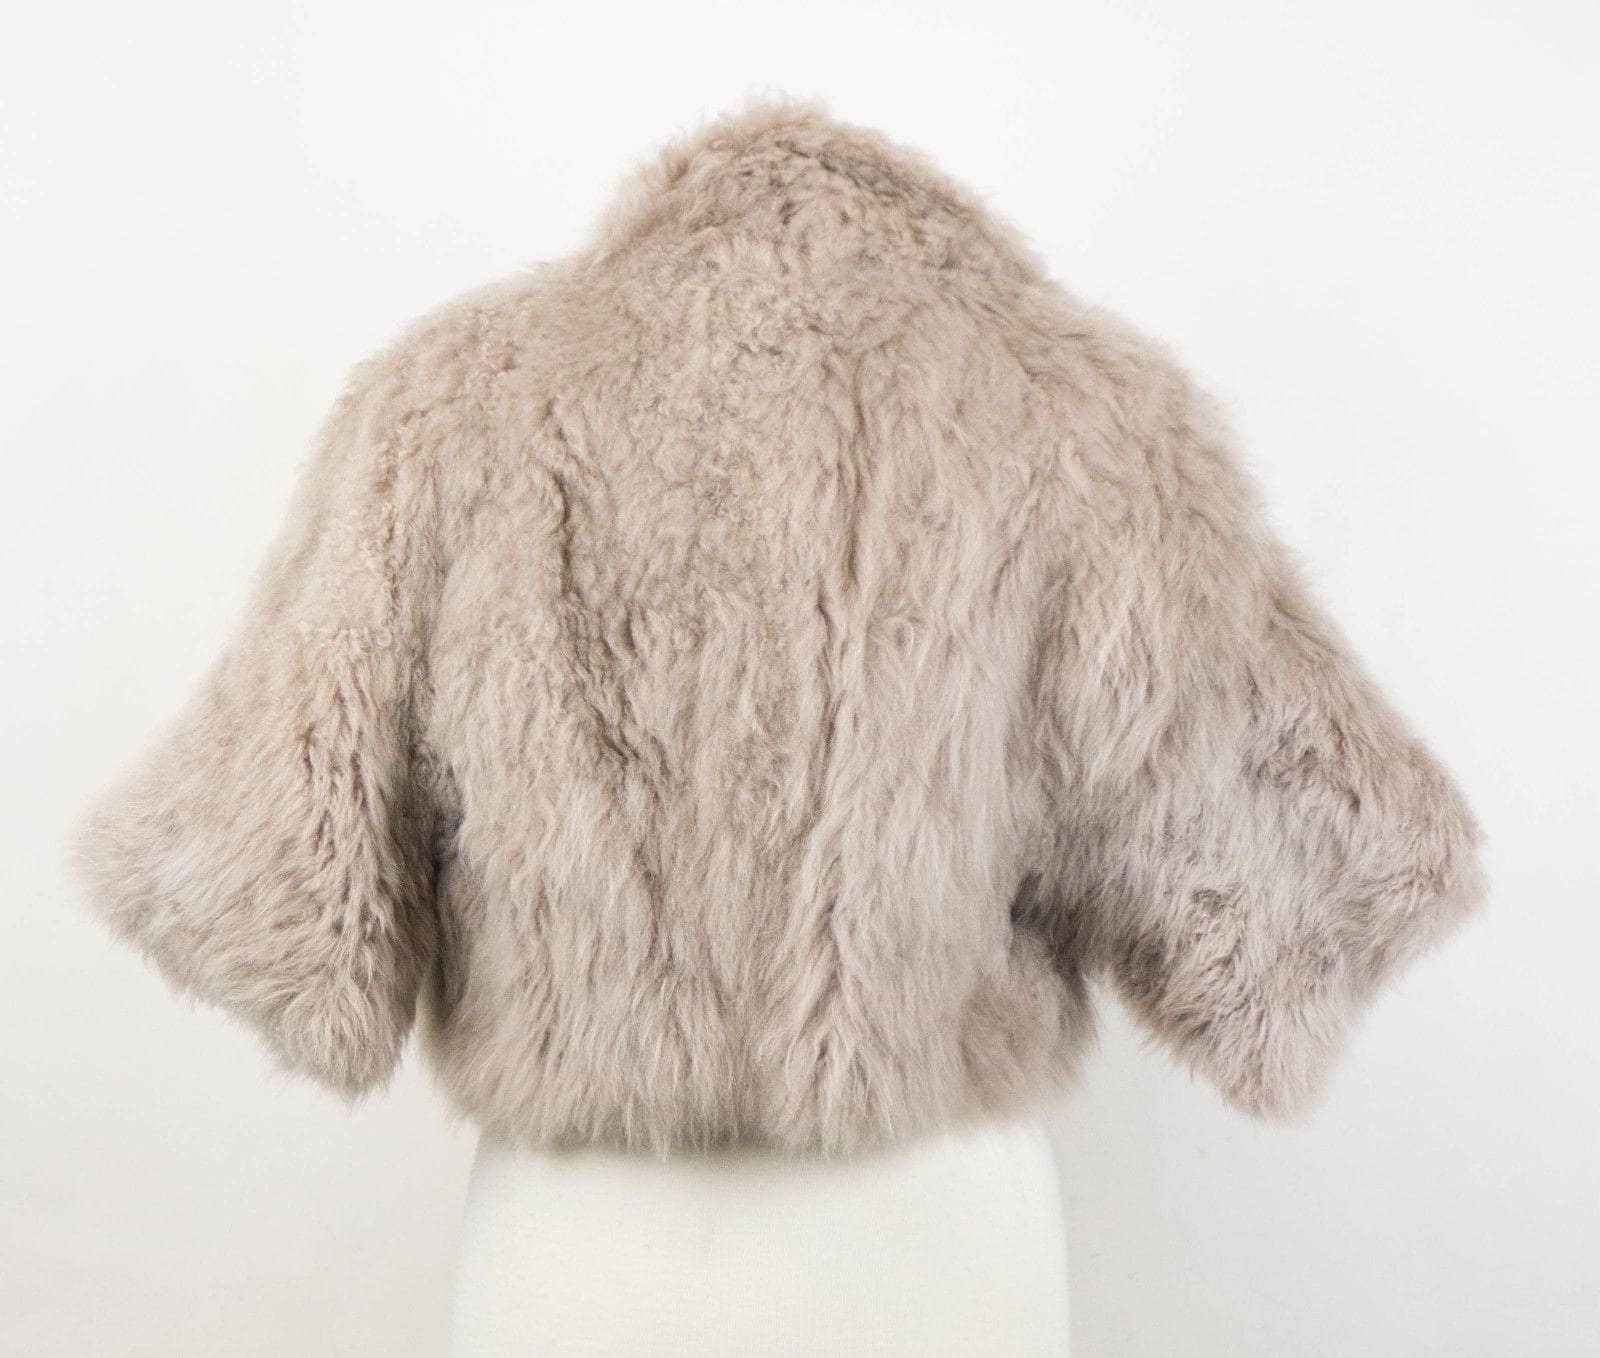 Brunello Cucinelli Outerwear Aug-44 Cashmere Fur Shearling Leather Jacket - Gray JF1-R4-7/8 JF1-R4-7/8